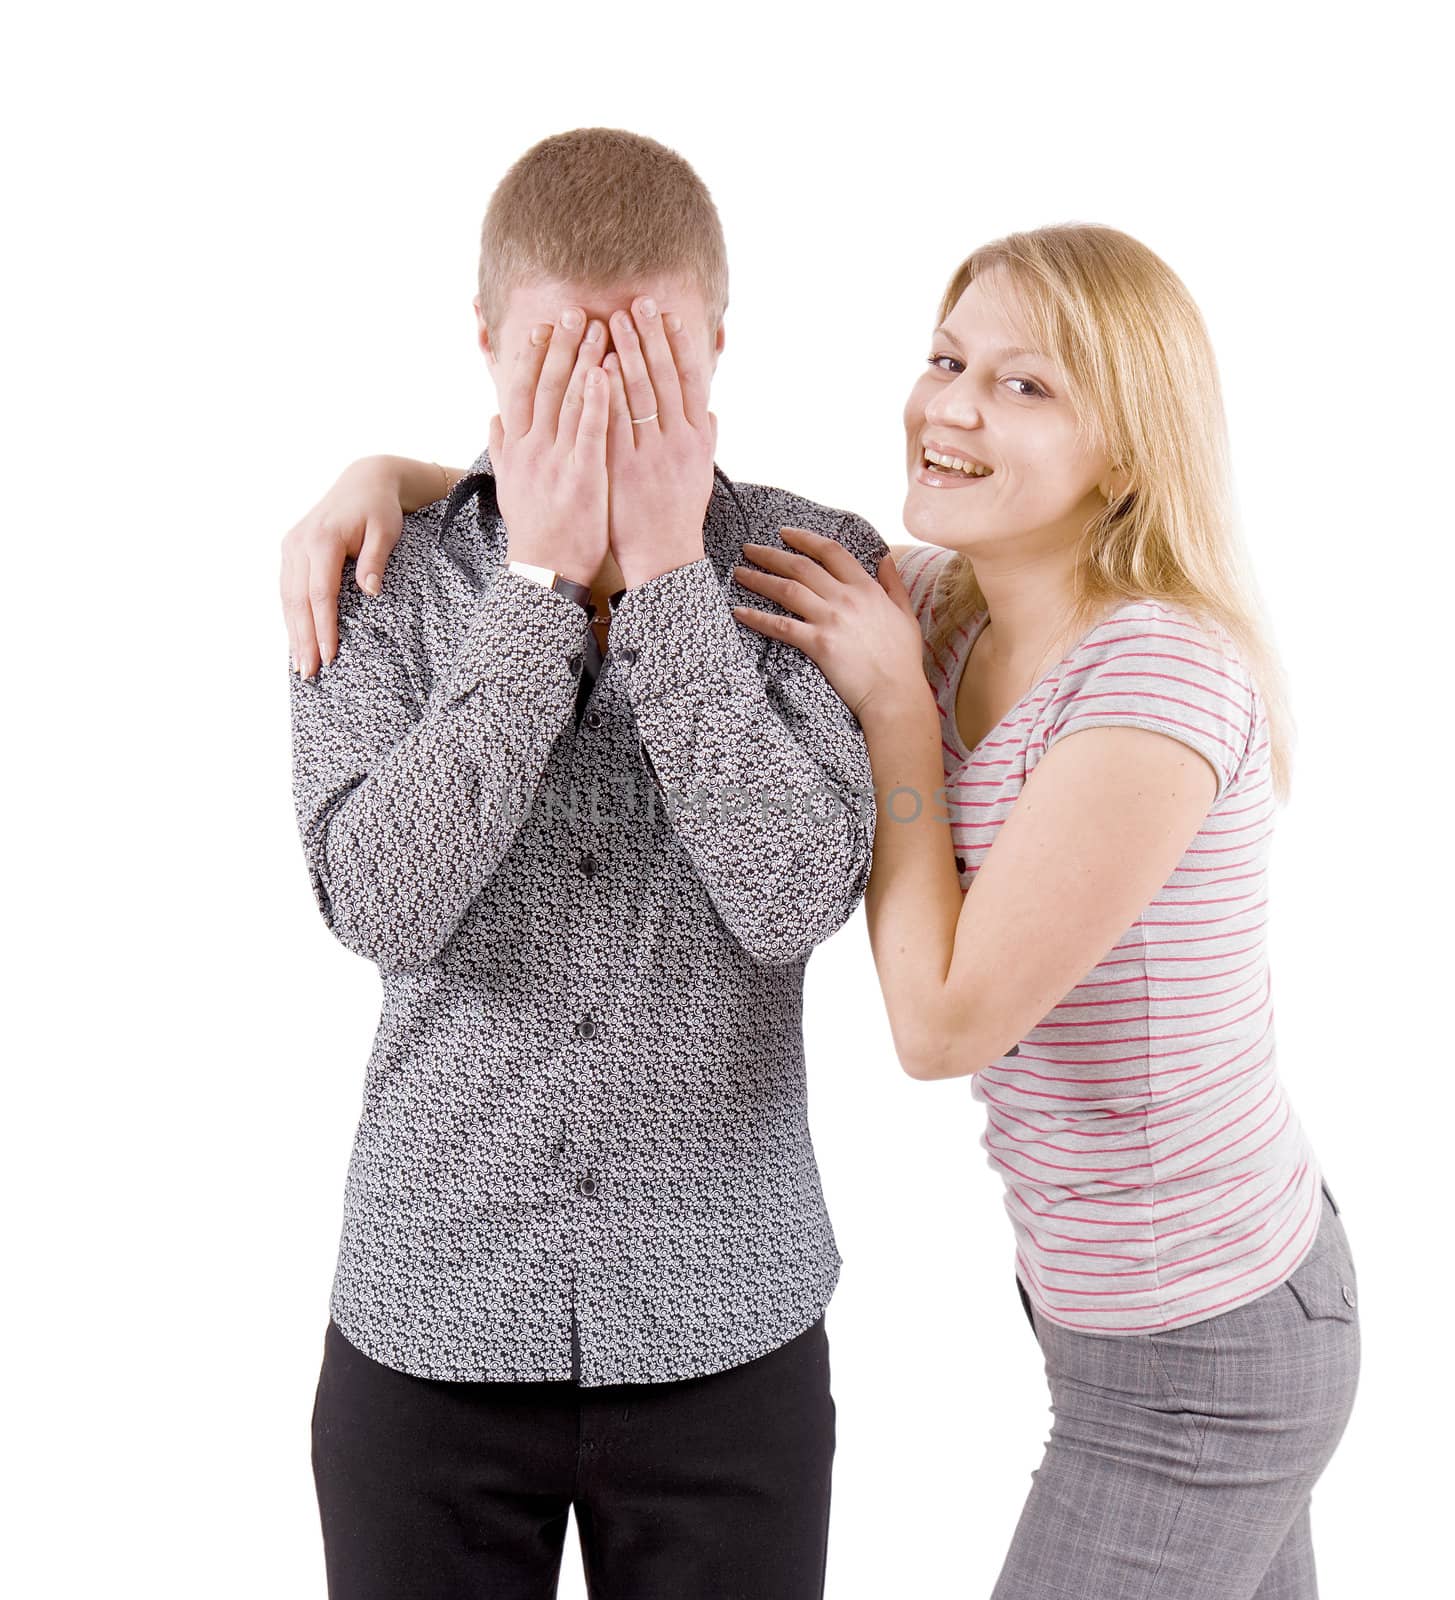 young couple. A man hides his face. The woman smiles hugging a man